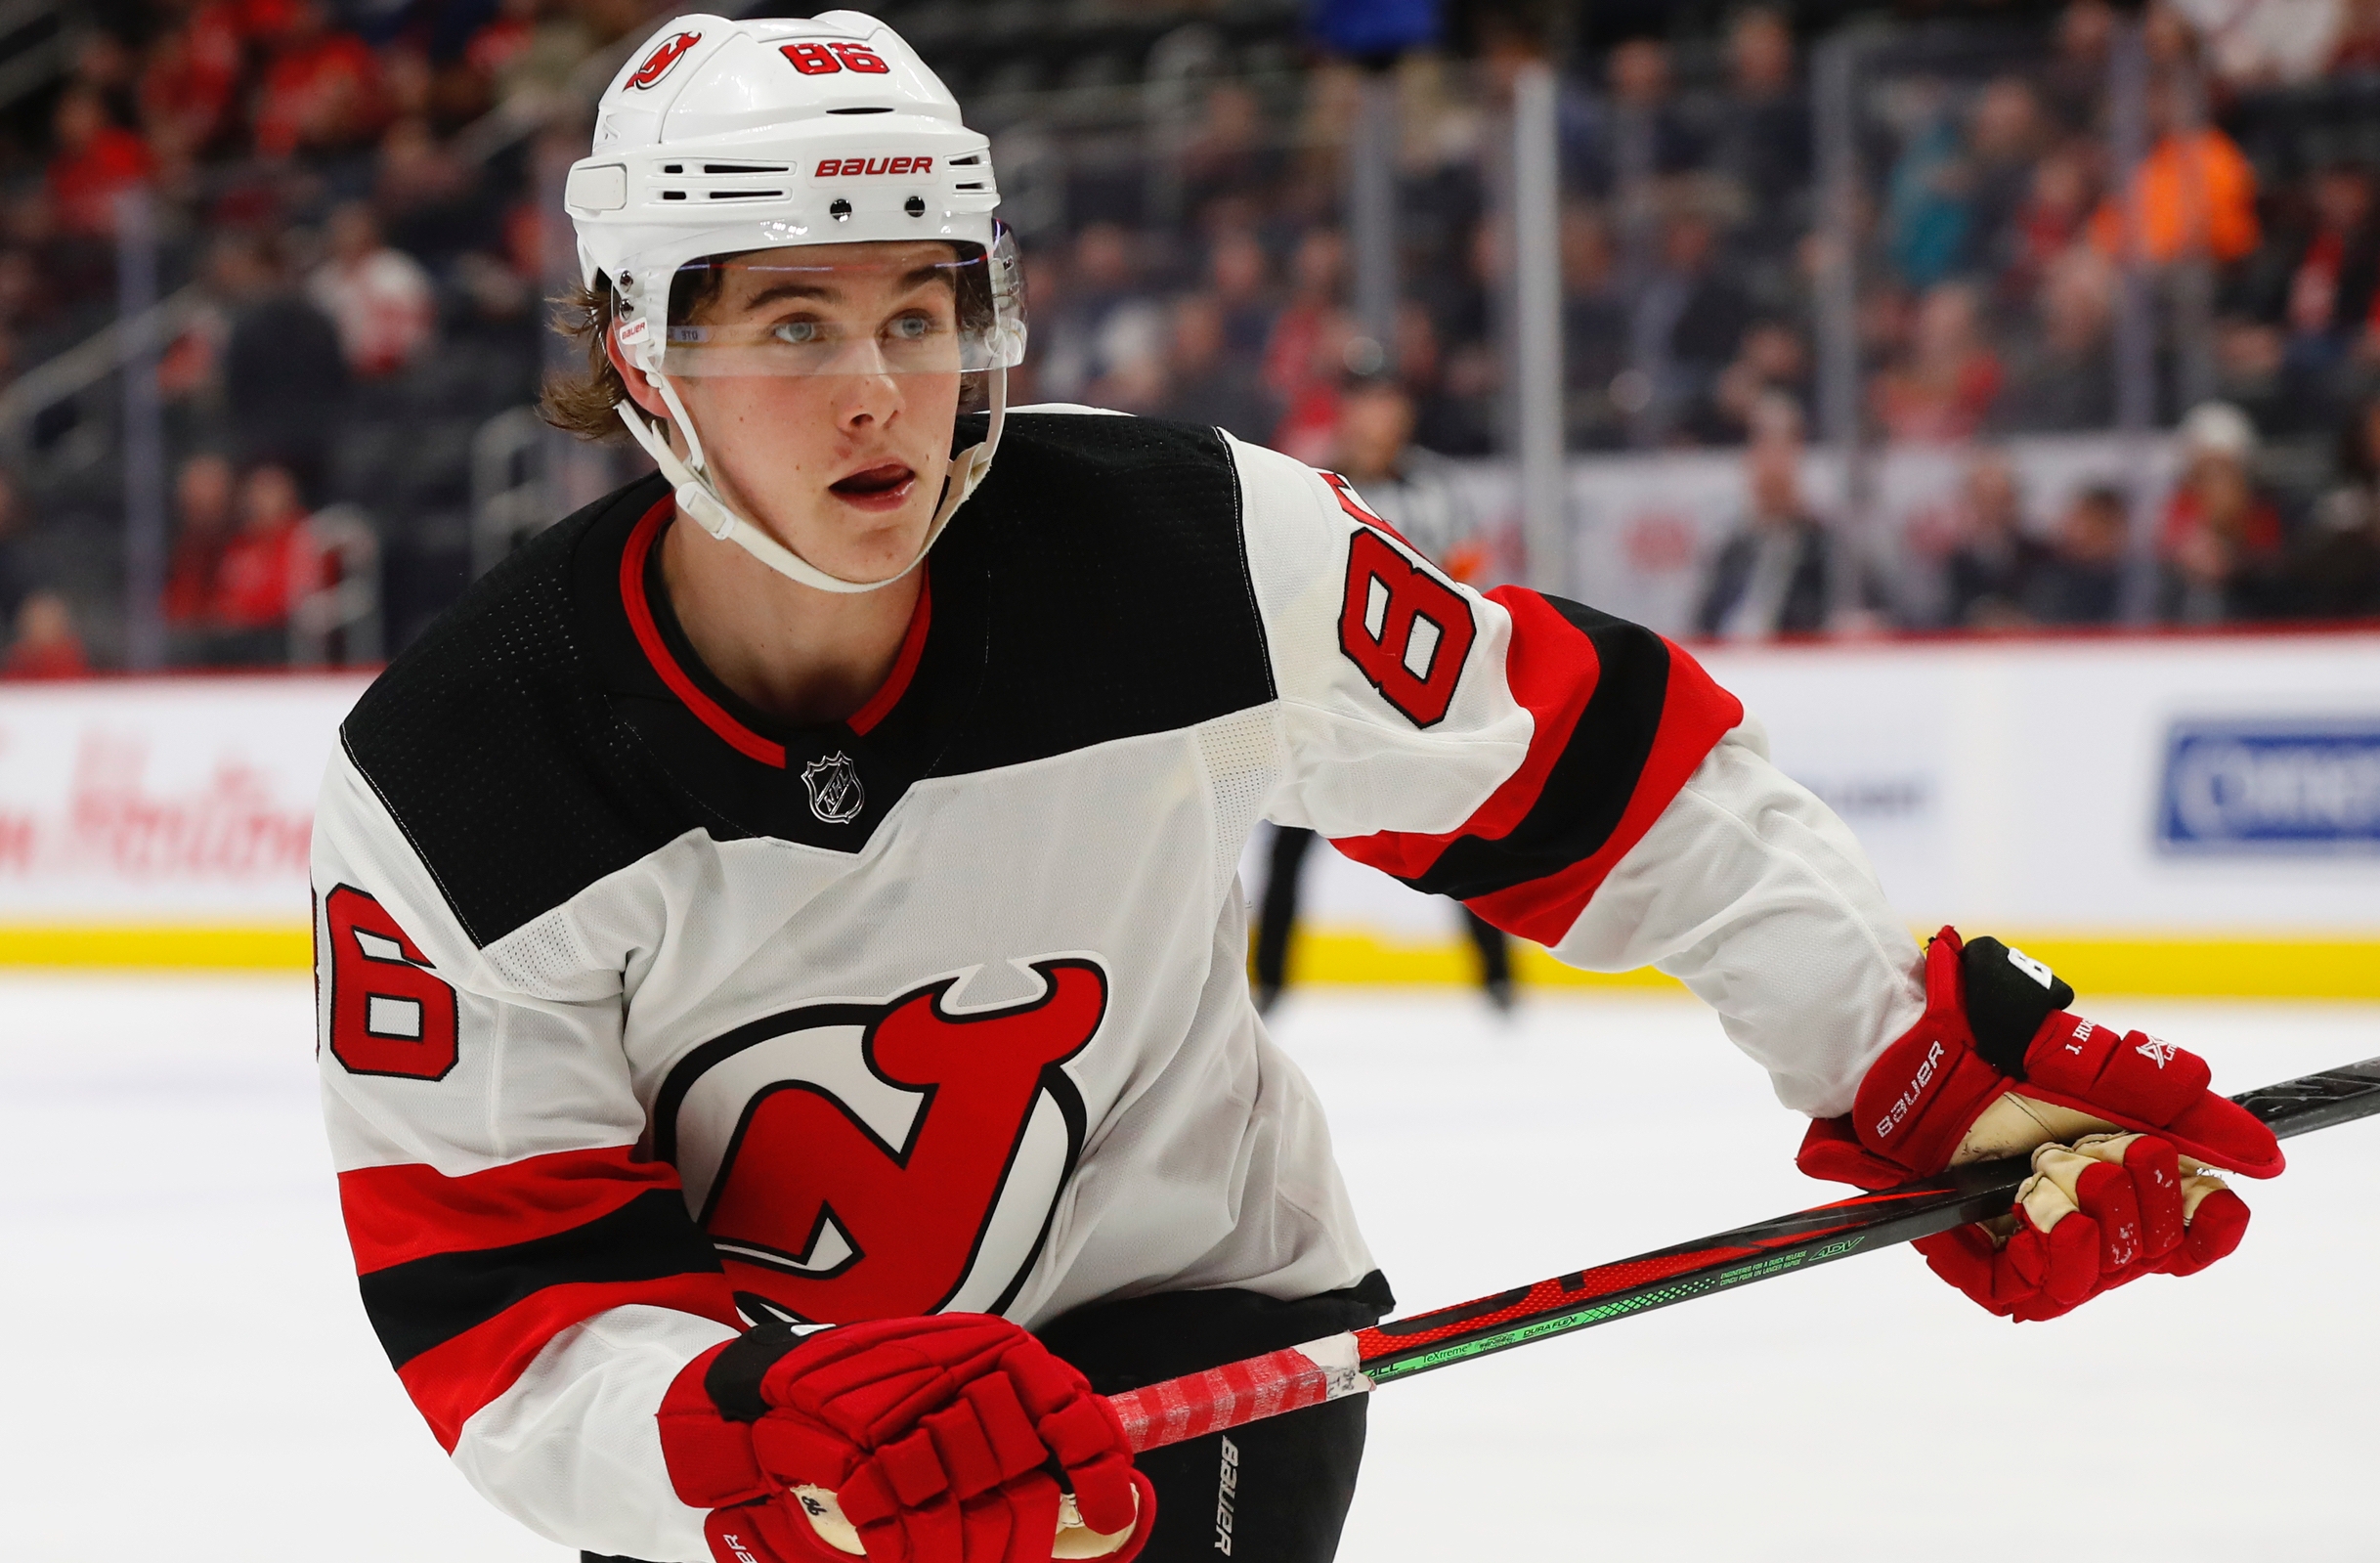 The young New Jersey Devils seem poised to make a Cup run behind Jack  Hughes and Nico Hischier, Pro National Sports